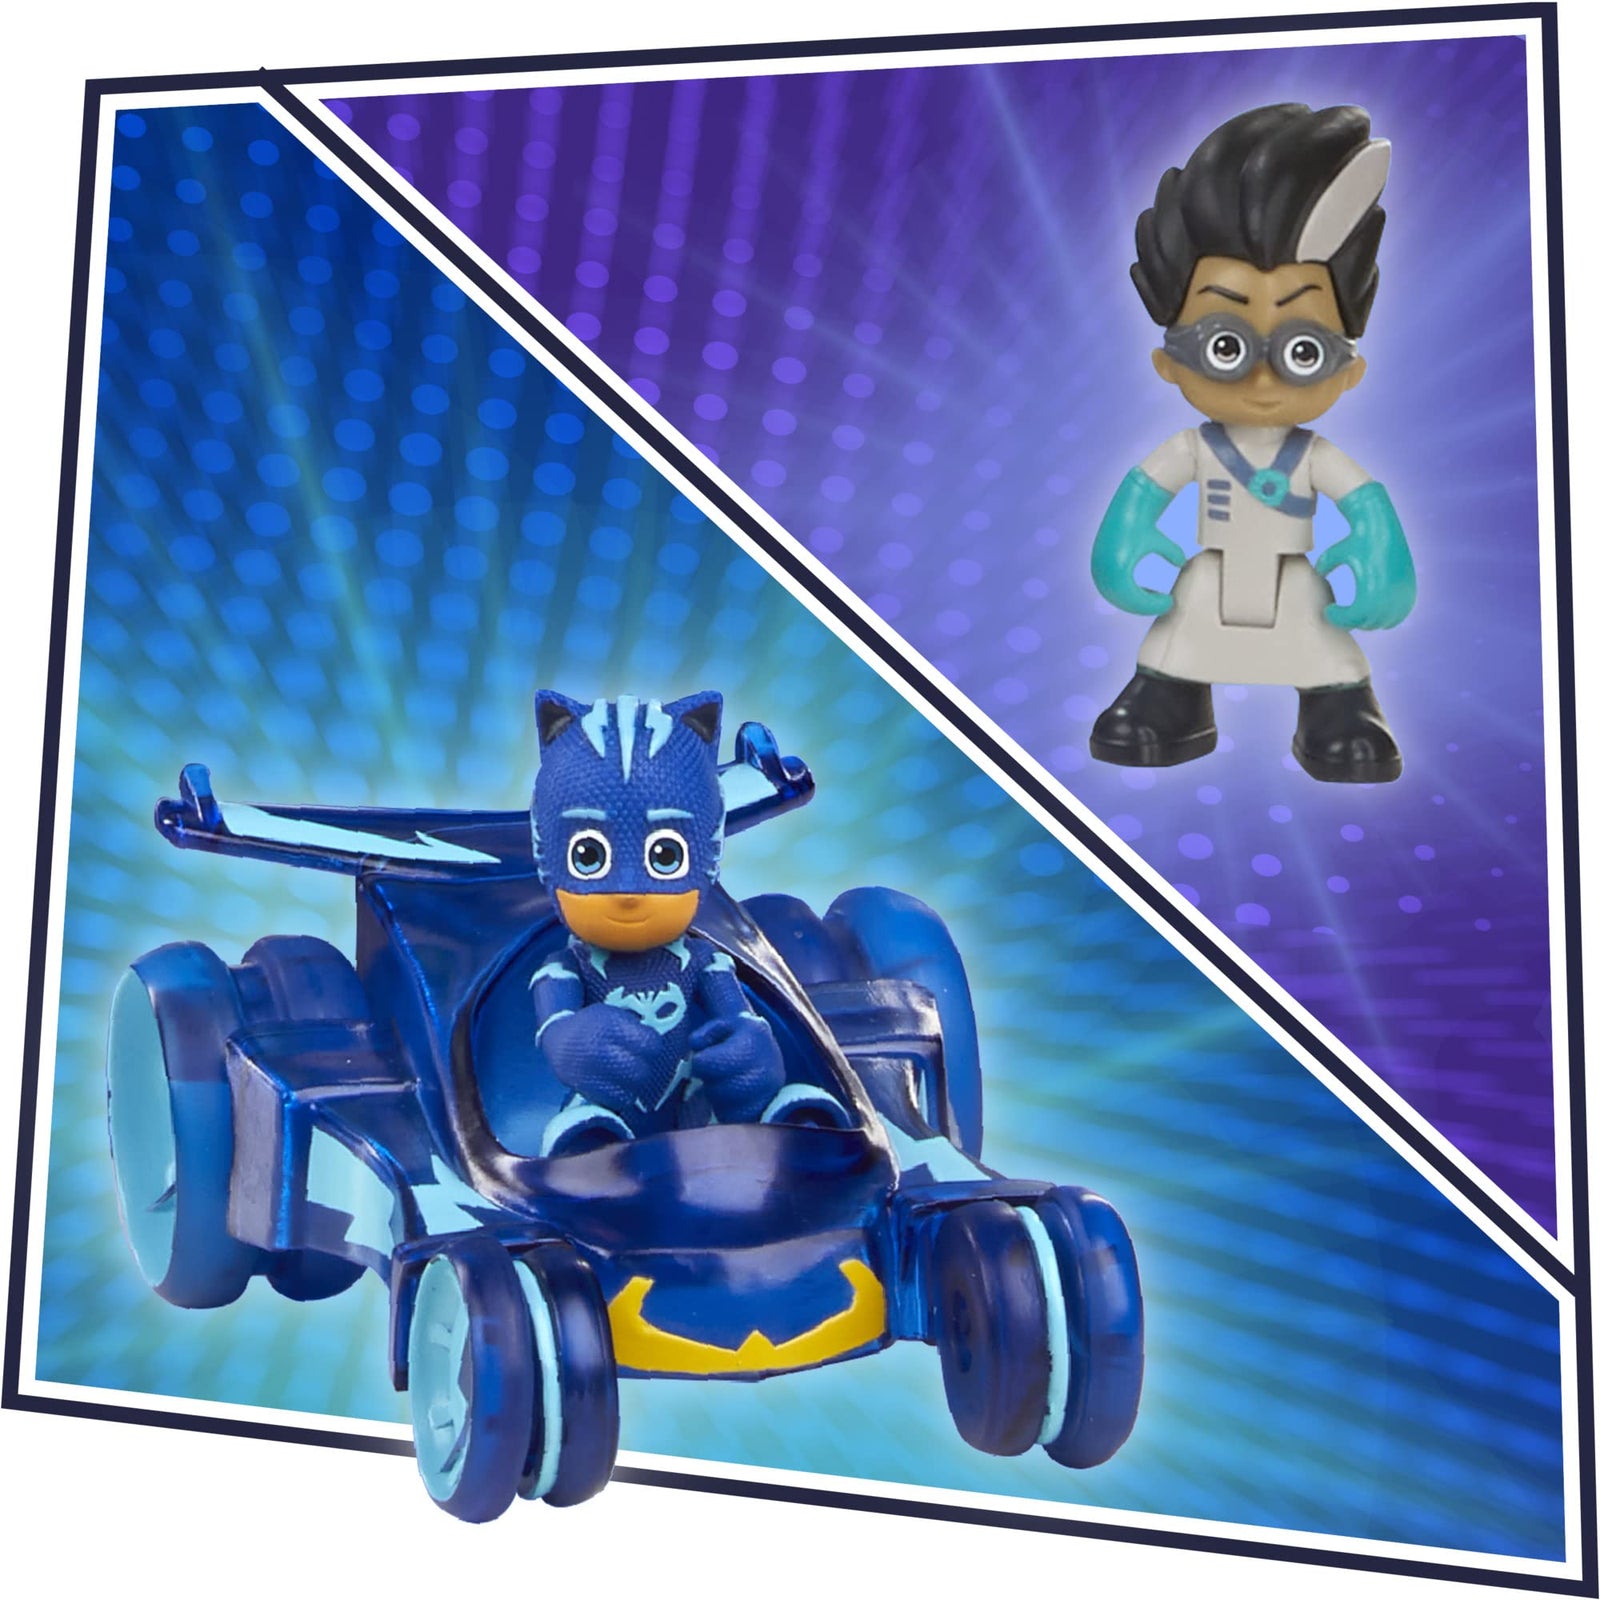 PJ Masks Deluxe Battle HQ Preschool Toy, Headquarters Playset with 2 Action Figures, Cat-Car Vehicle, and More for Kids Ages 3 and Up